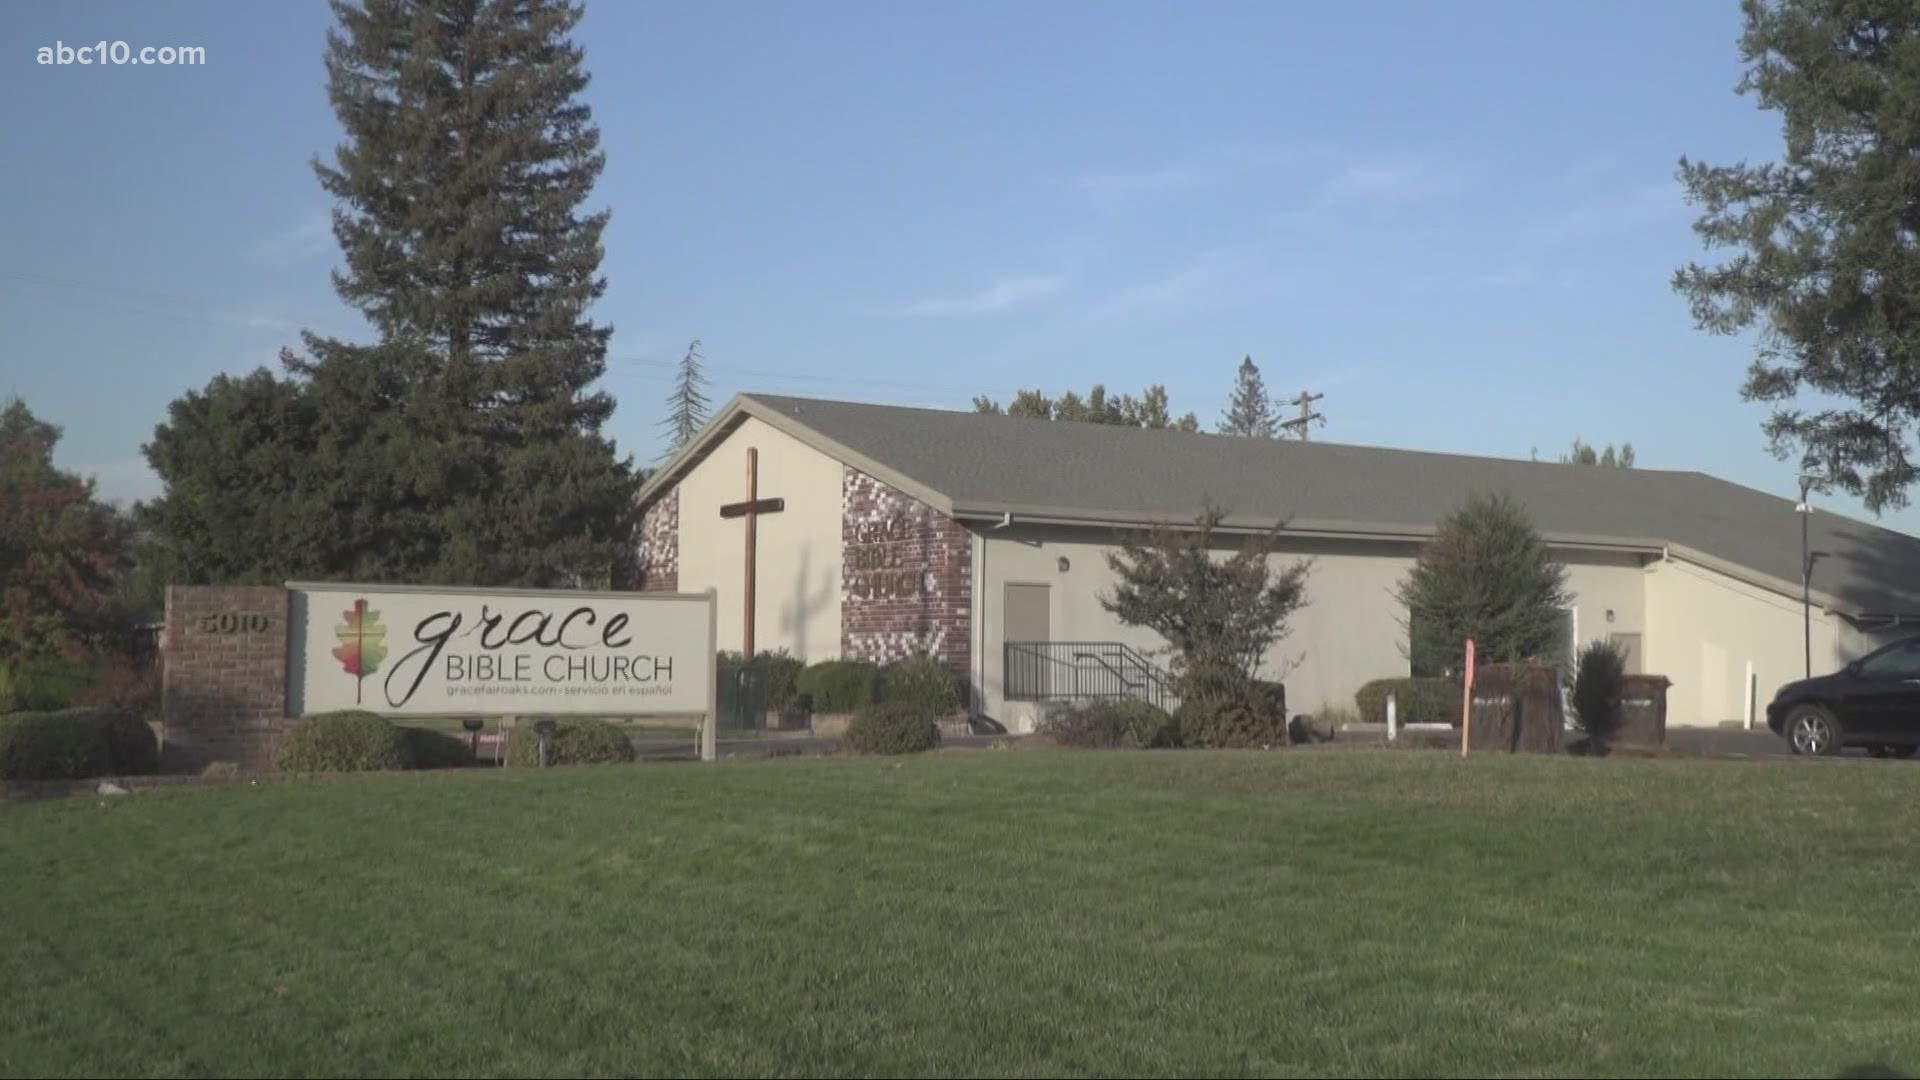 While not all churches are defying the state orders, state health officials want to reiterate how coronavirus outbreaks have happened at churches.